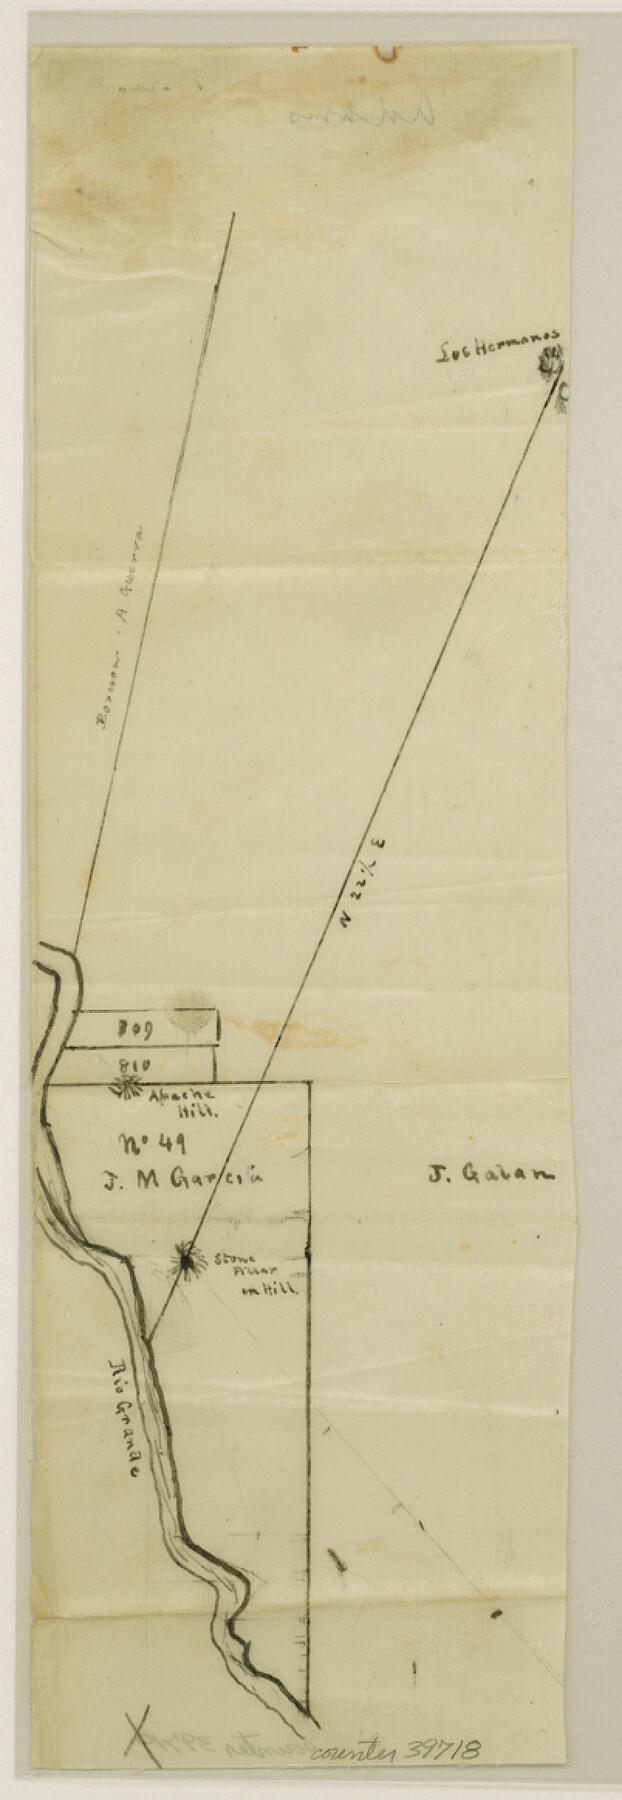 39718, Webb County Sketch File 4a, General Map Collection